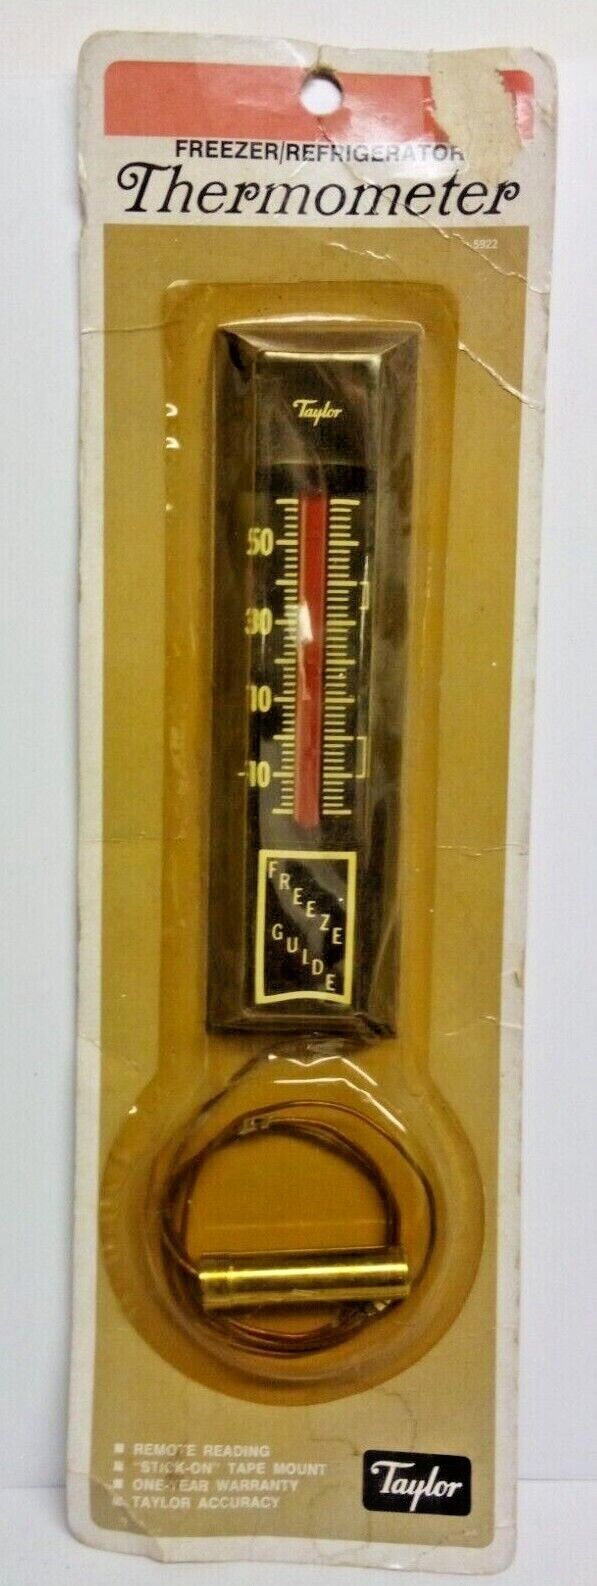 RARE VTG TAYLOR FREEZE-GUIDE REMOTE READING FREEZER / REFIGERATOR THERMOMETER